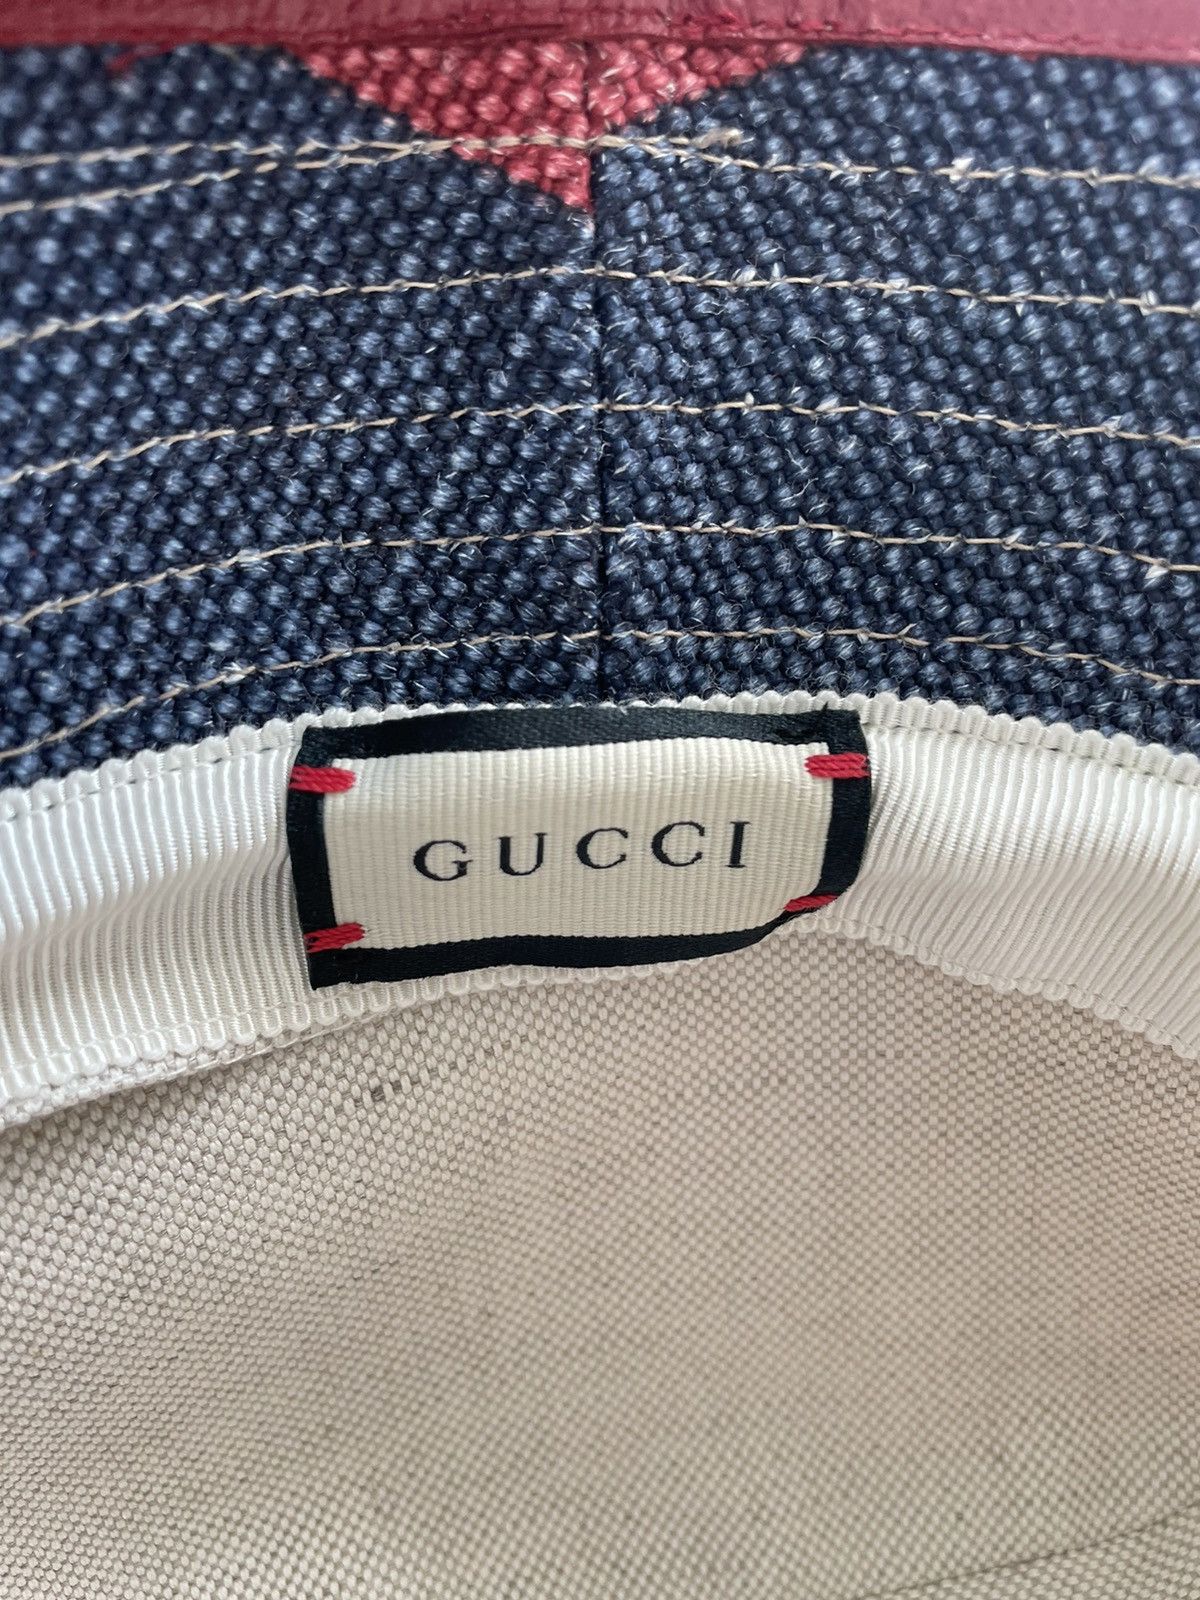 Gucci Brand New Super Runway Limited Edition Rare Gucci Logo Hat Size ONE SIZE - 3 Thumbnail